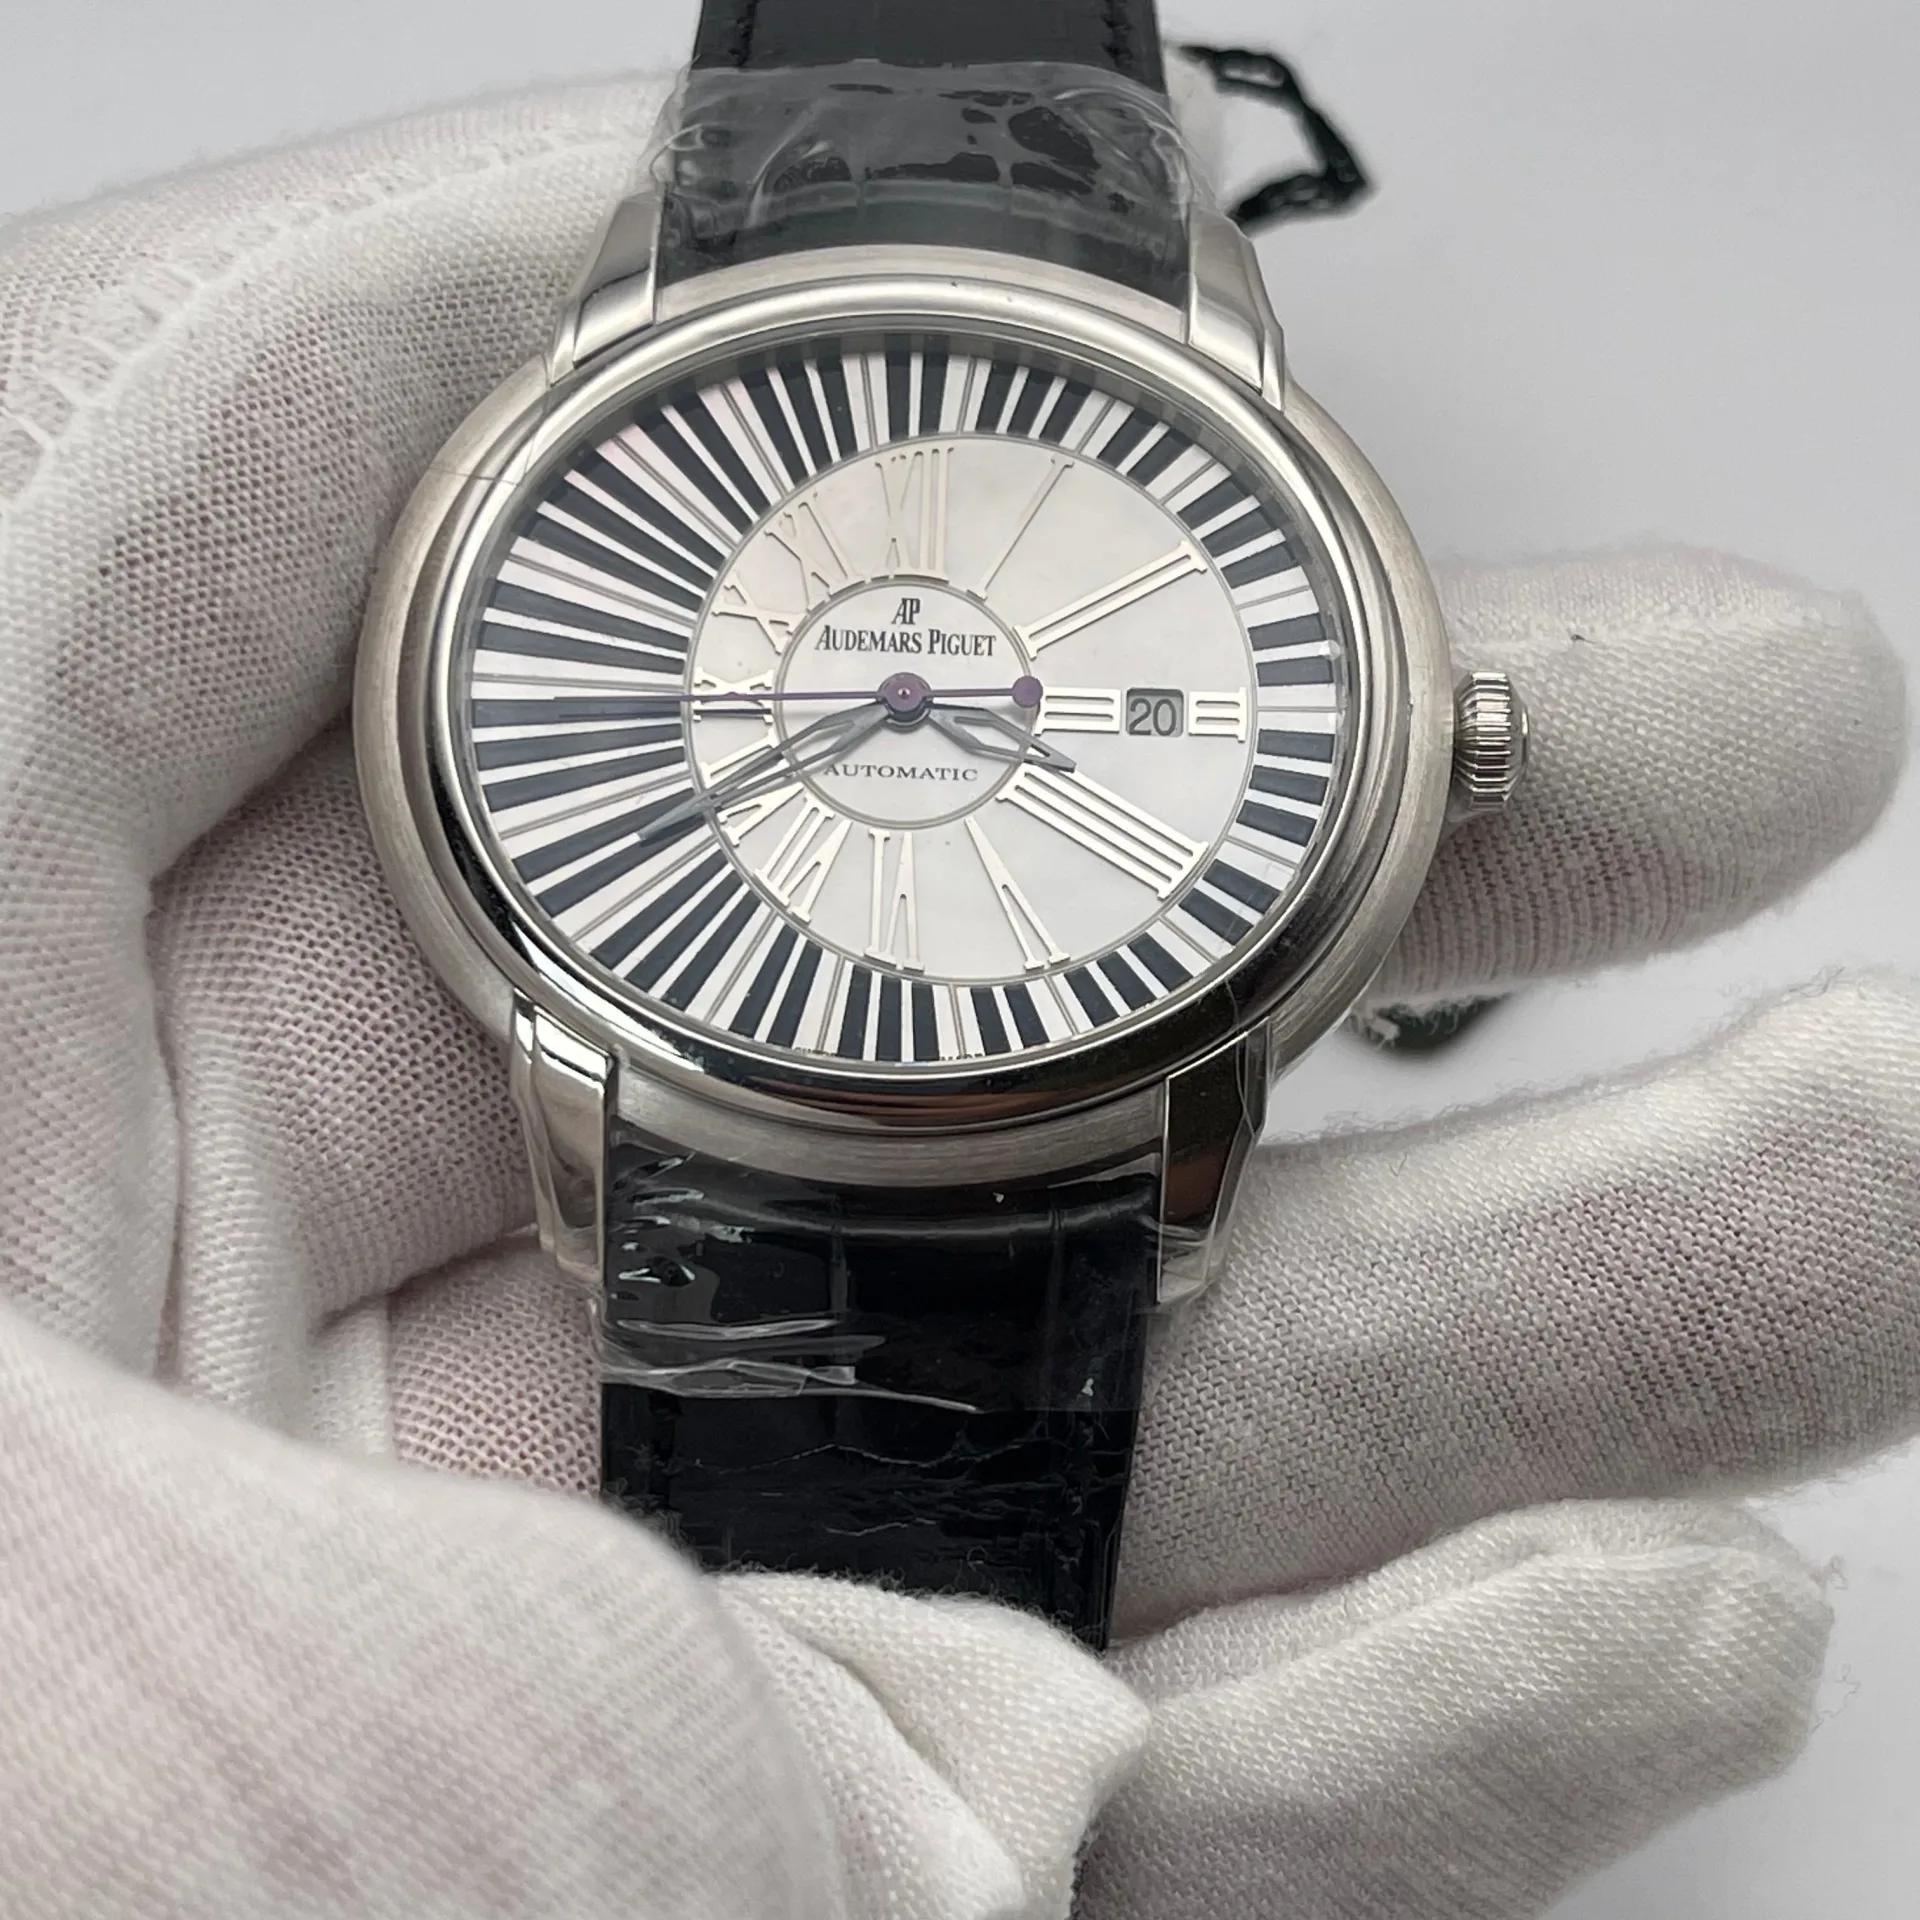 Audemars Piguet Millenary Pianoforte 45 White Gold - Limited to 500 Pieces 15325BC.OO.D102CR.01 Listing Image